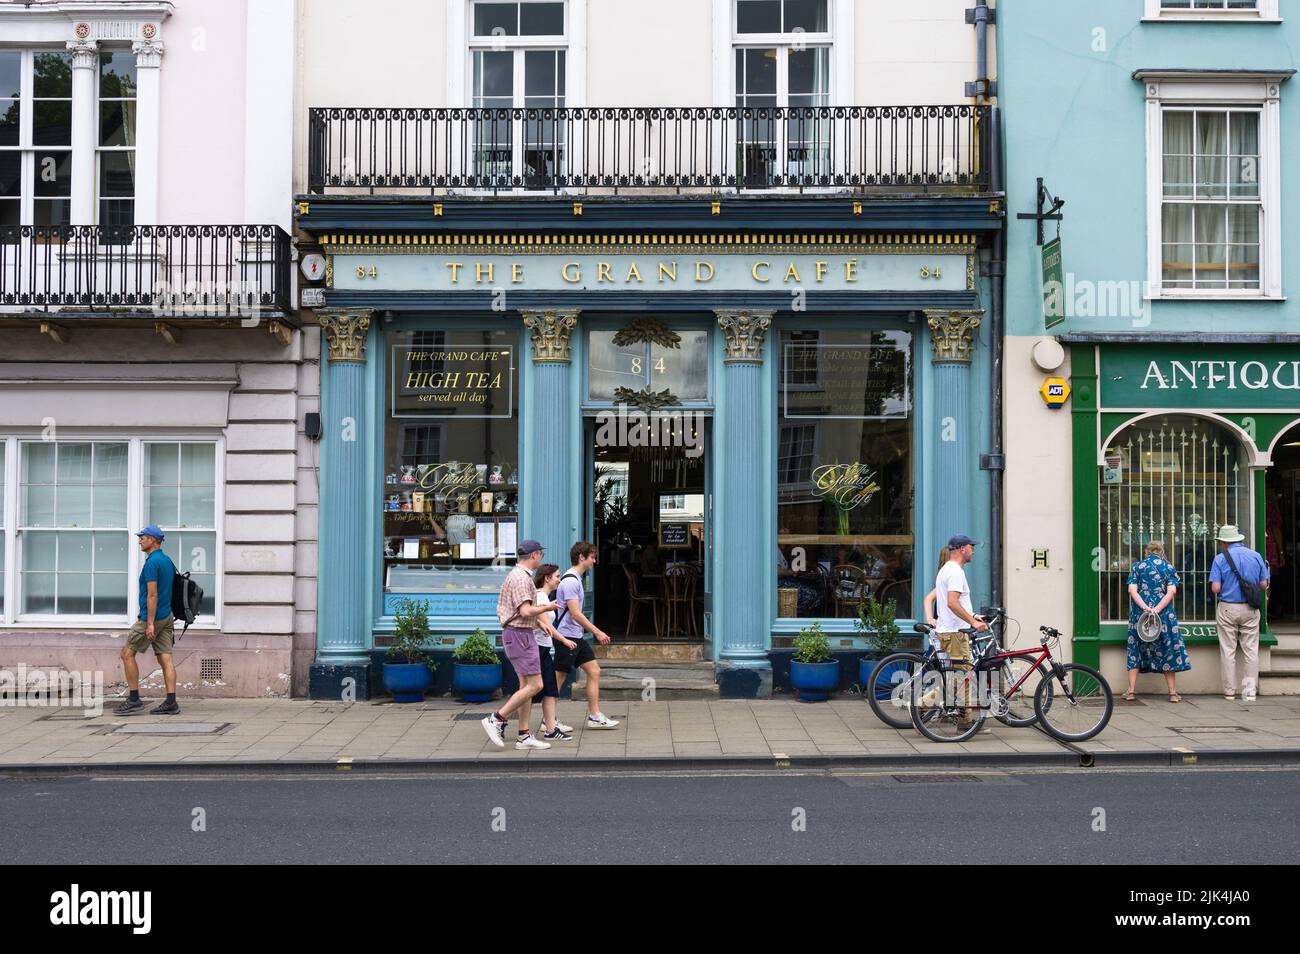 Exterior of The Grand Cafe tea room with people walking past, Oxford, UK Stock Photo